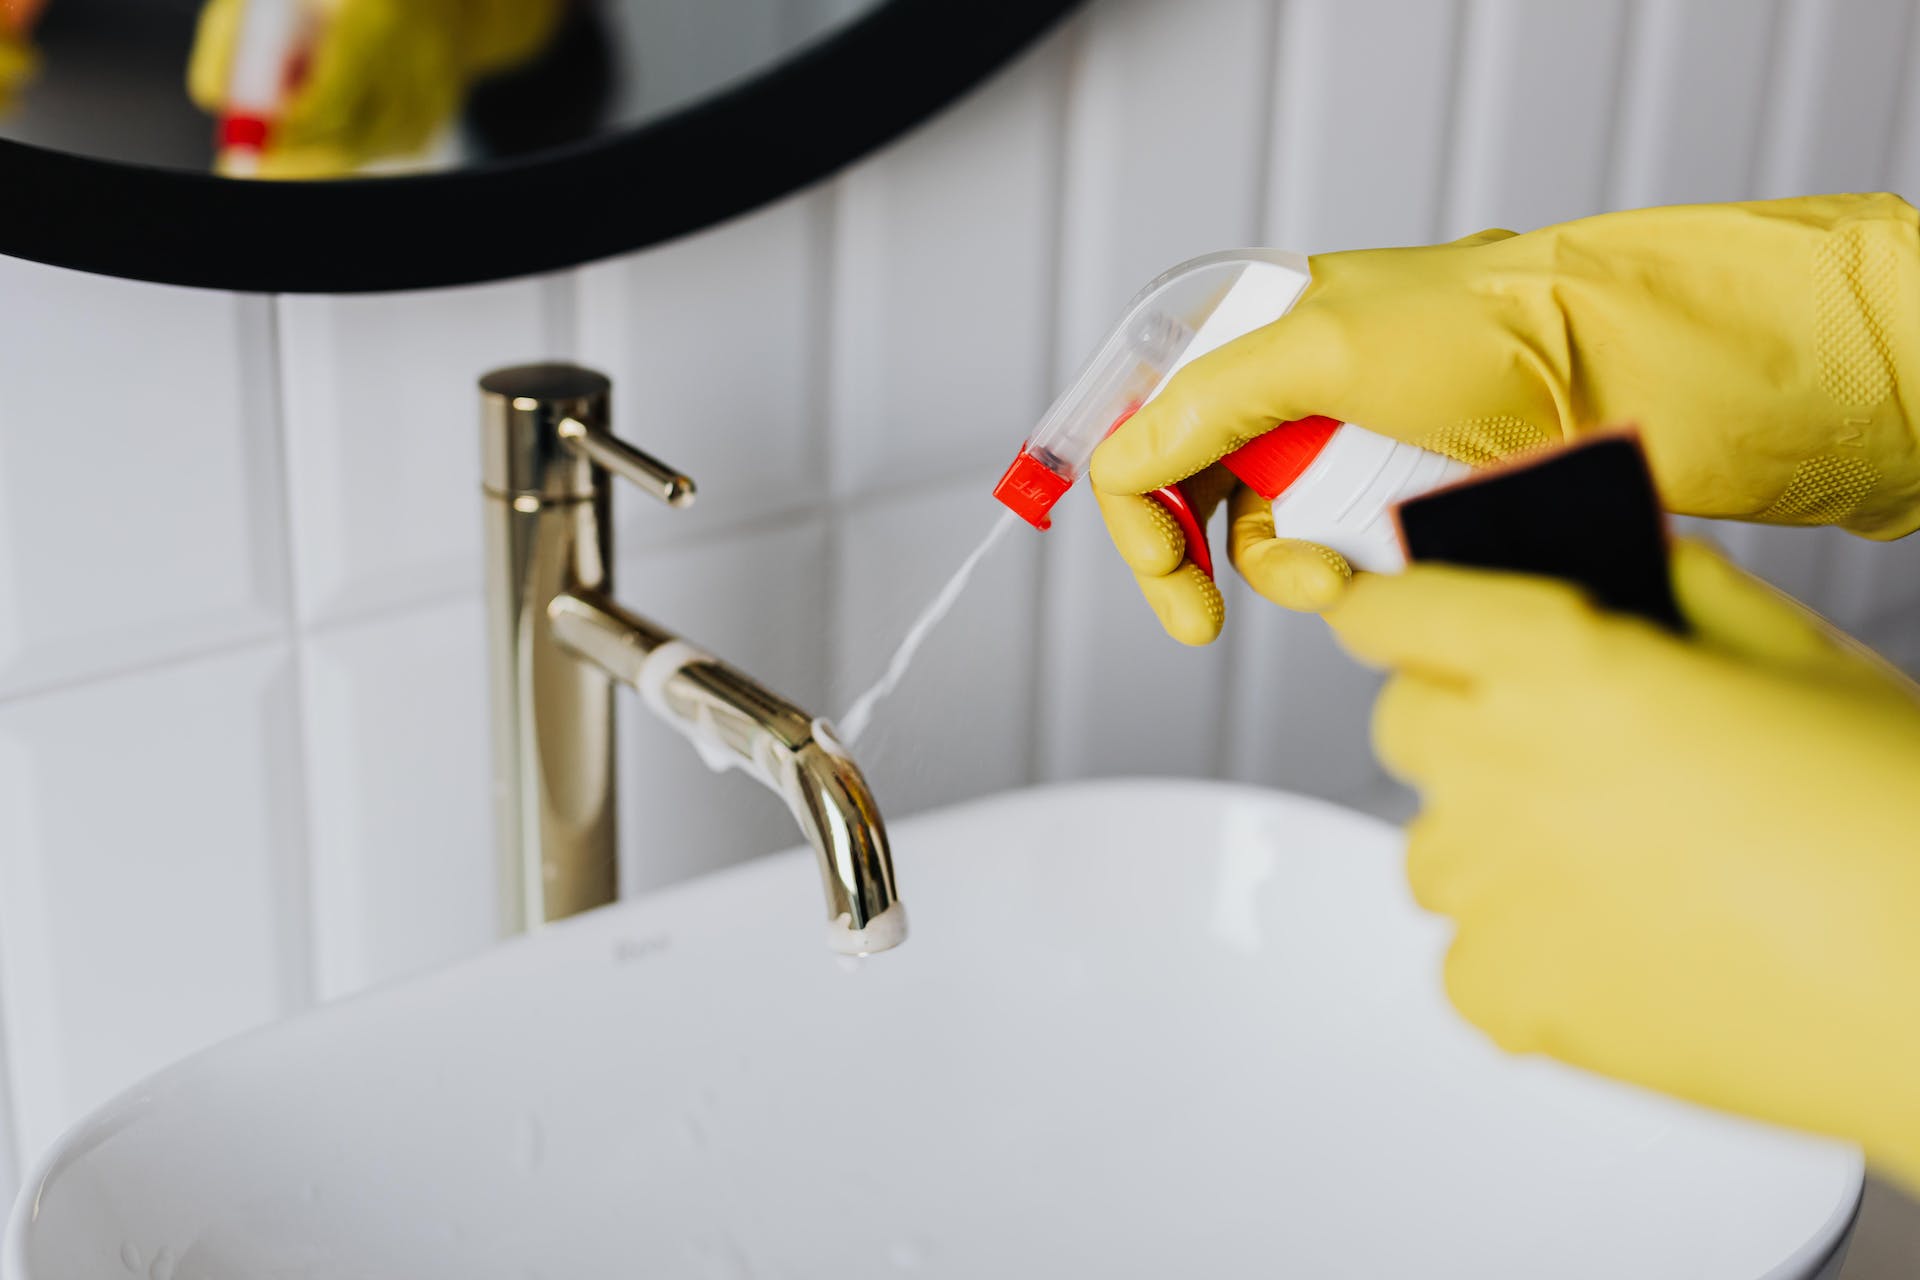 Person cleaning the bathroom with yellow gloves | Source: Pexels